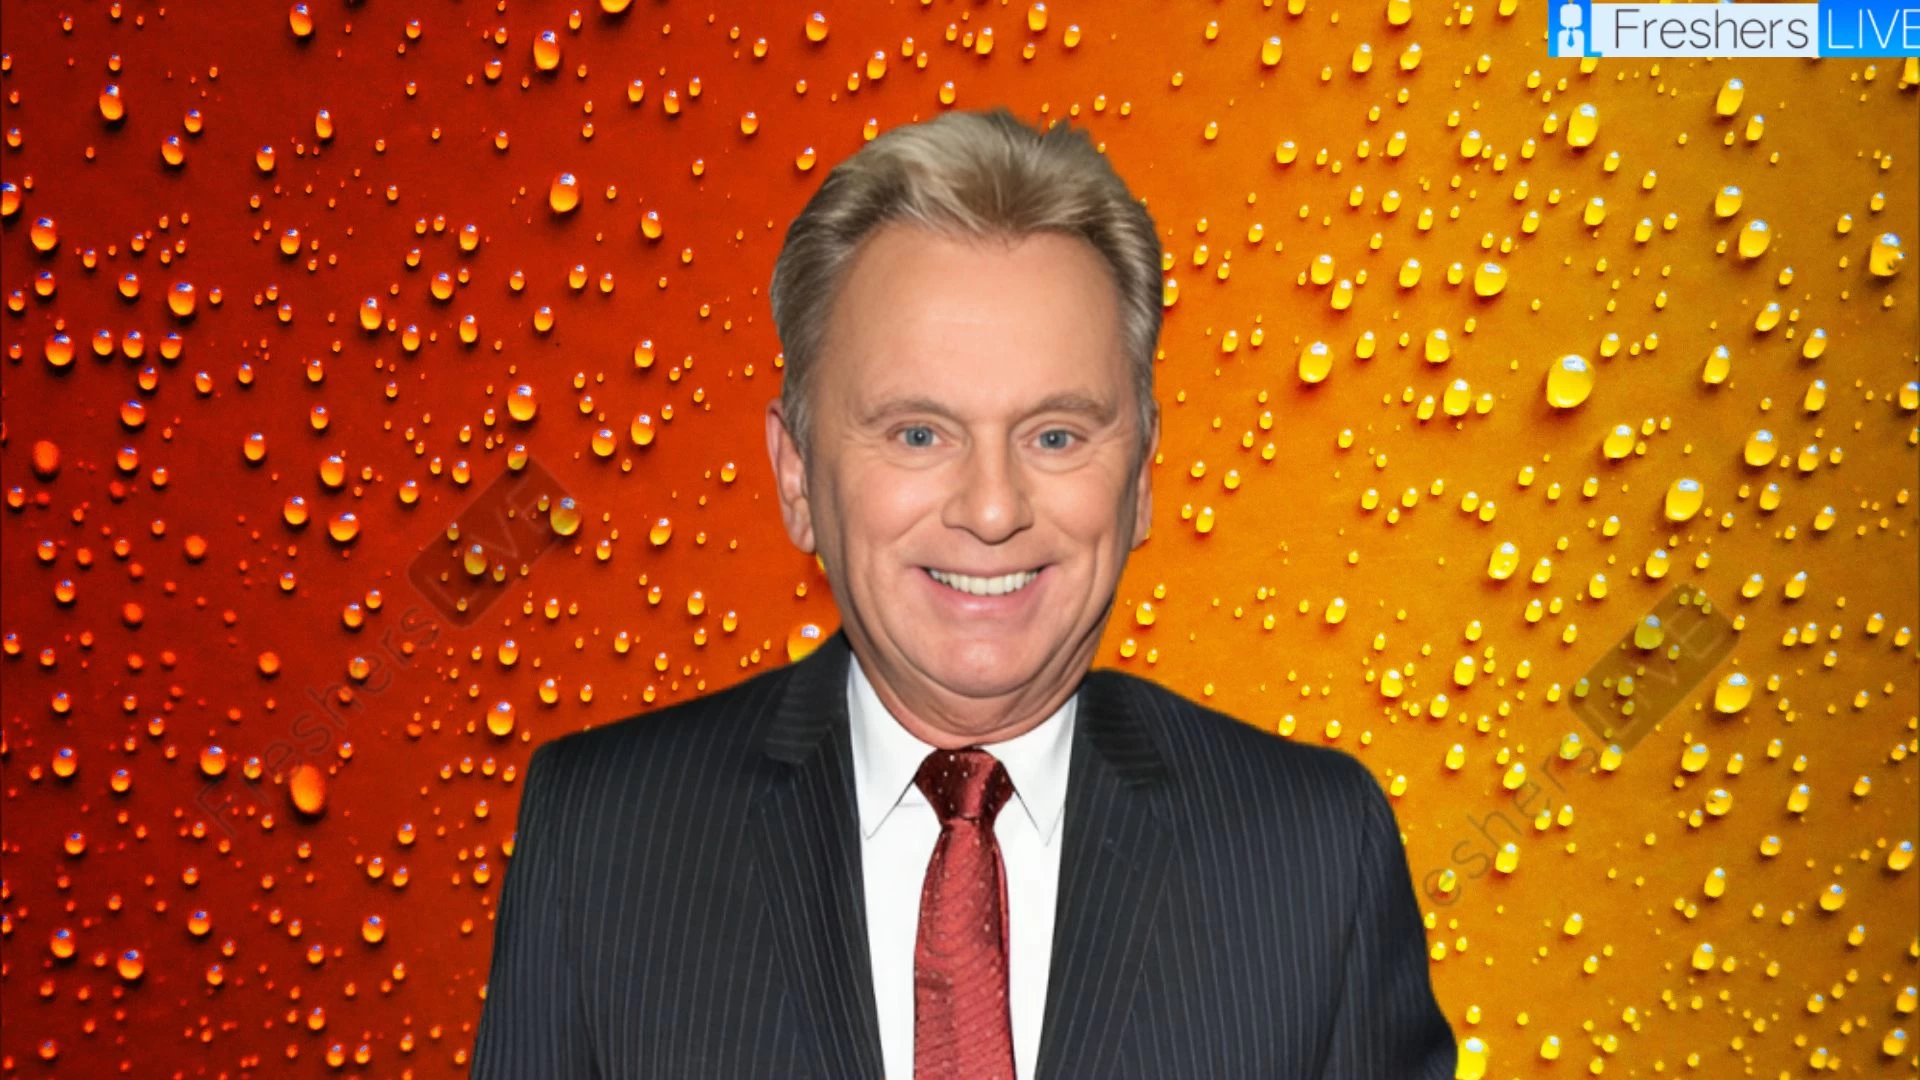 Pat Sajak Religion What Religion is Pat Sajak? Is Pat Sajak a Christianity?